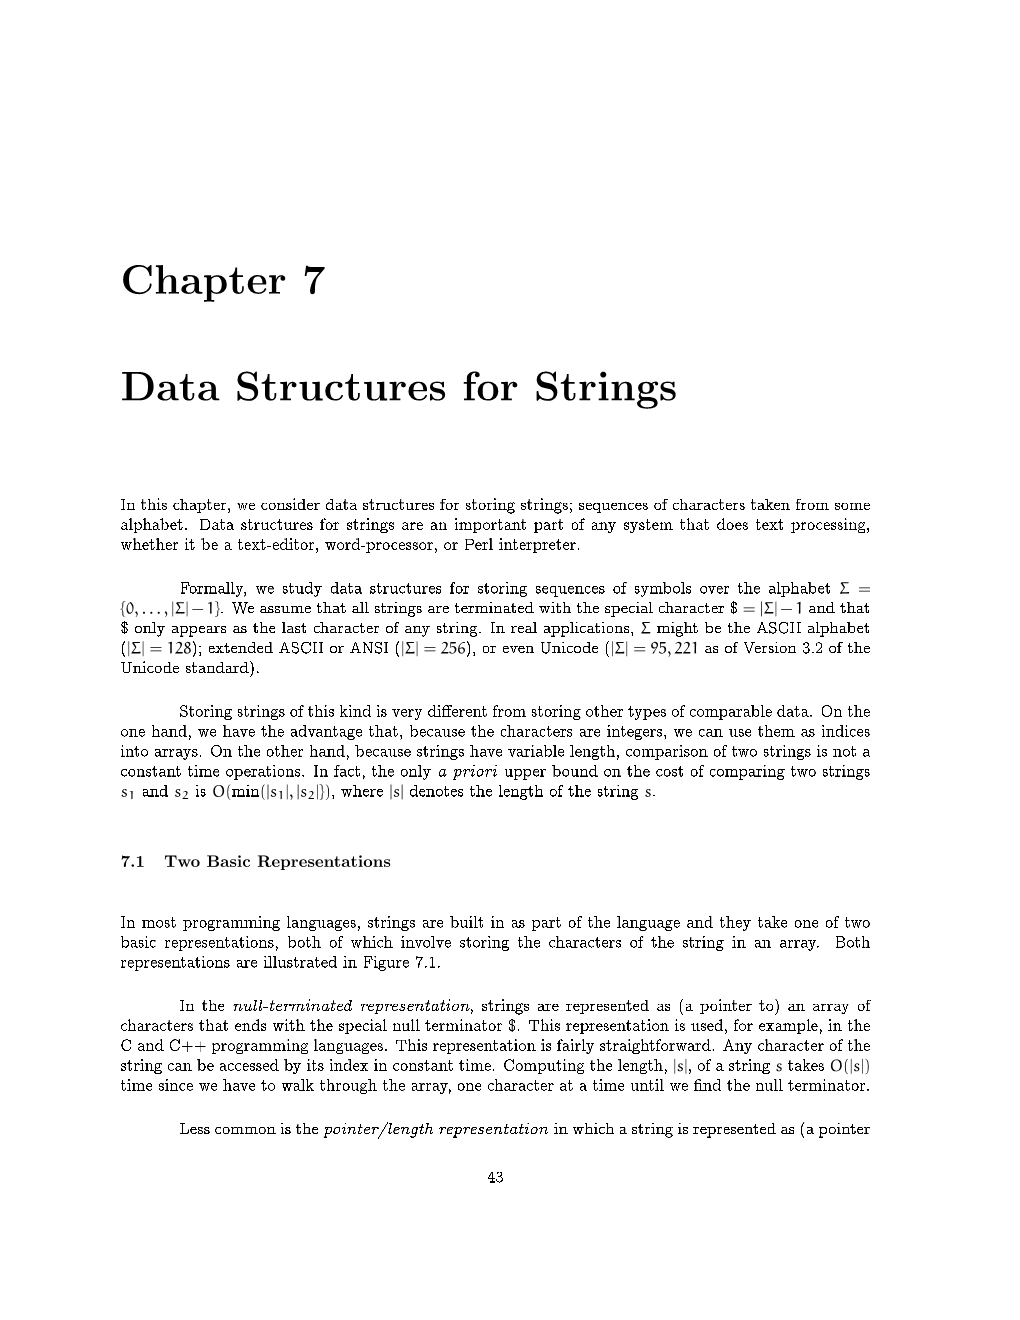 Data Structures for Strings